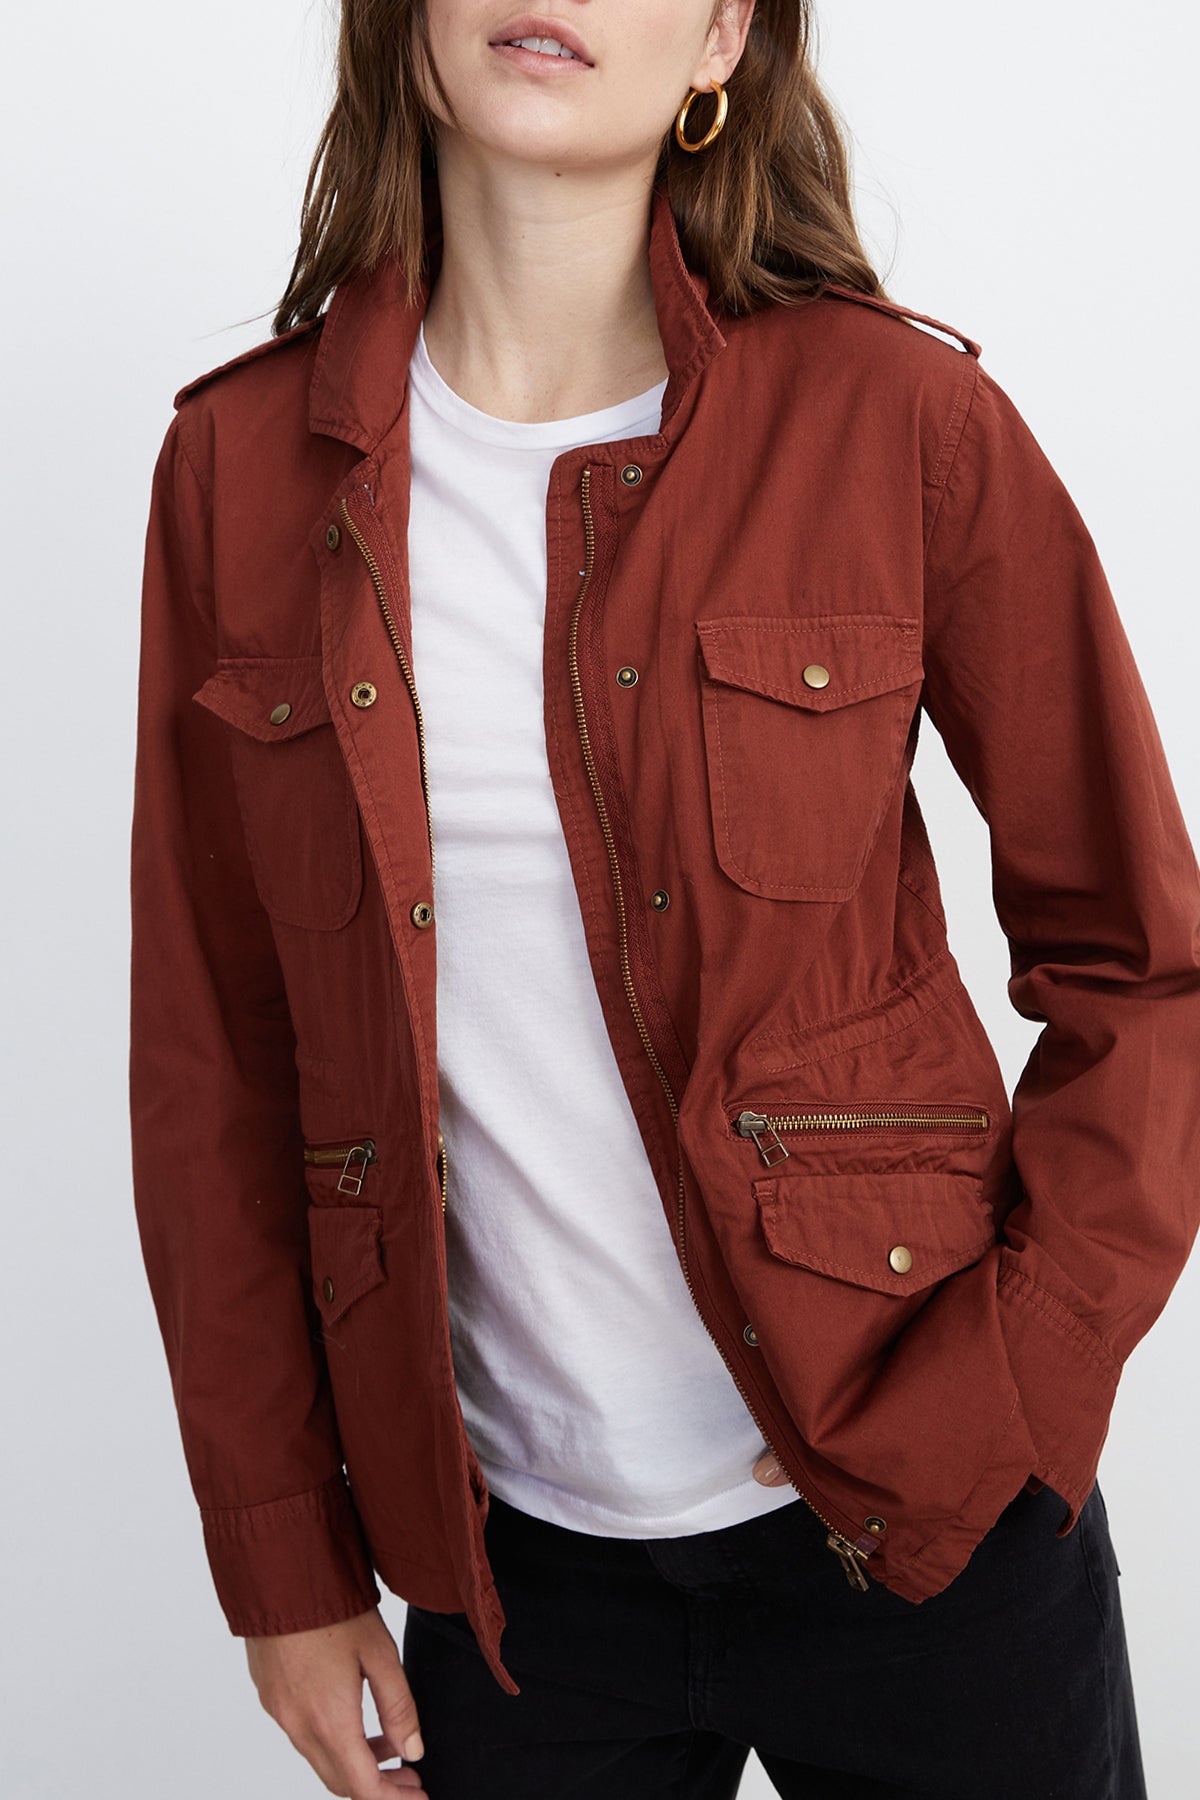   ruby jacket rust front 